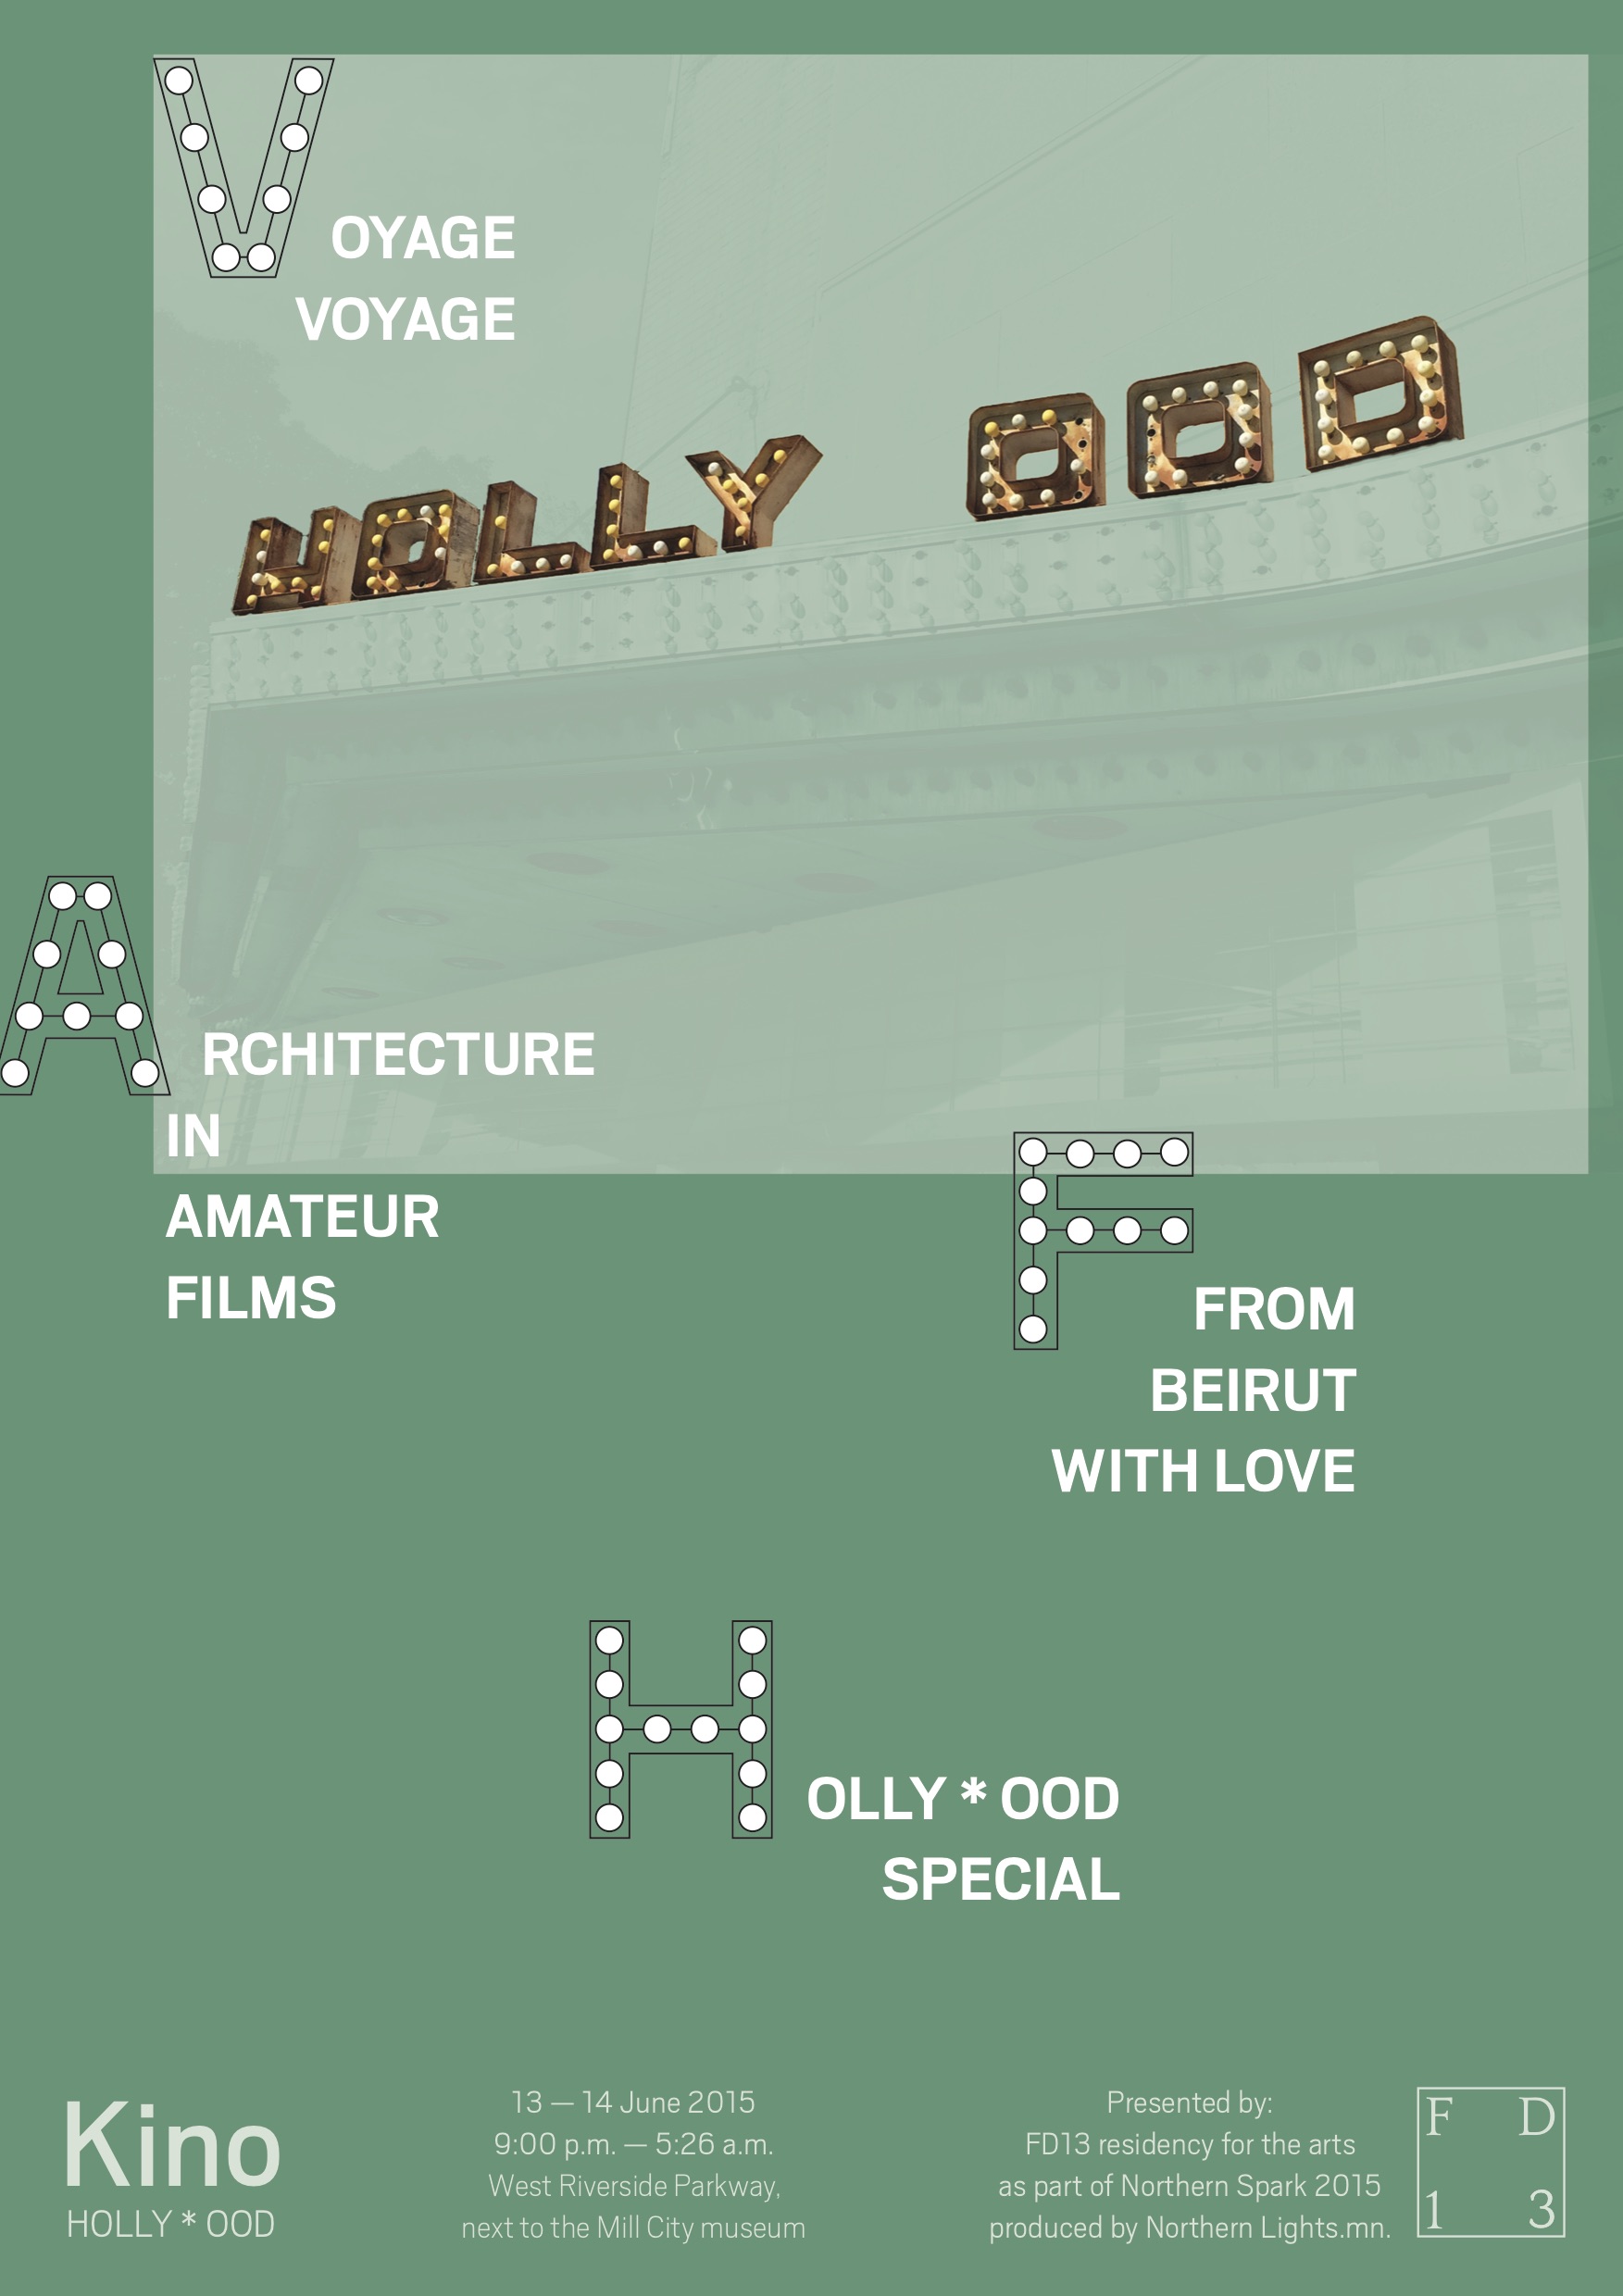 KINO HOLLY*OOD at Northern Spark, 13 June 2015, 9 p.m. – 5.26 a.m.